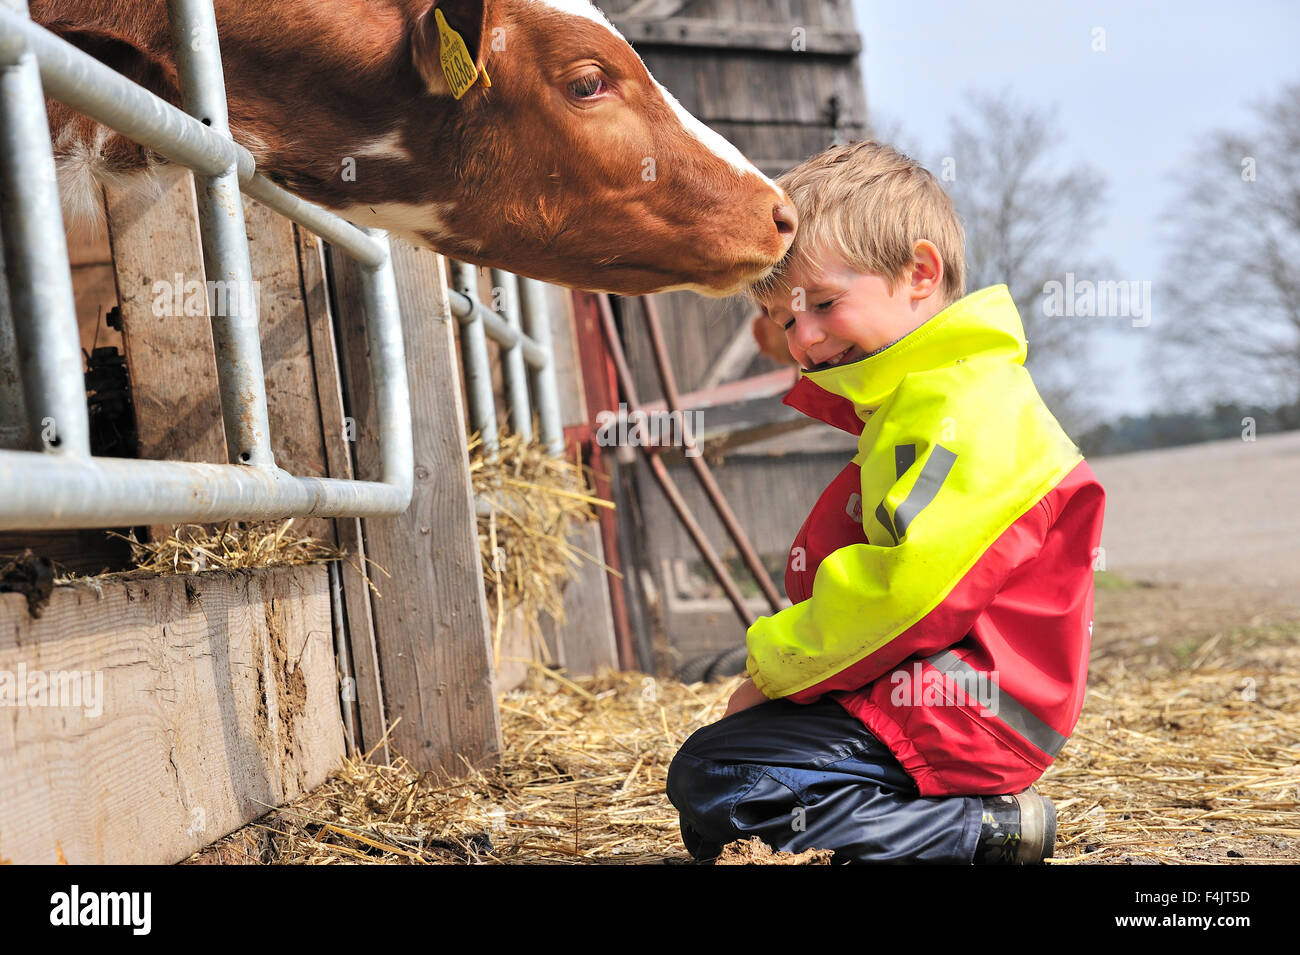 Boy being licked by cow in enclosure Stock Photo